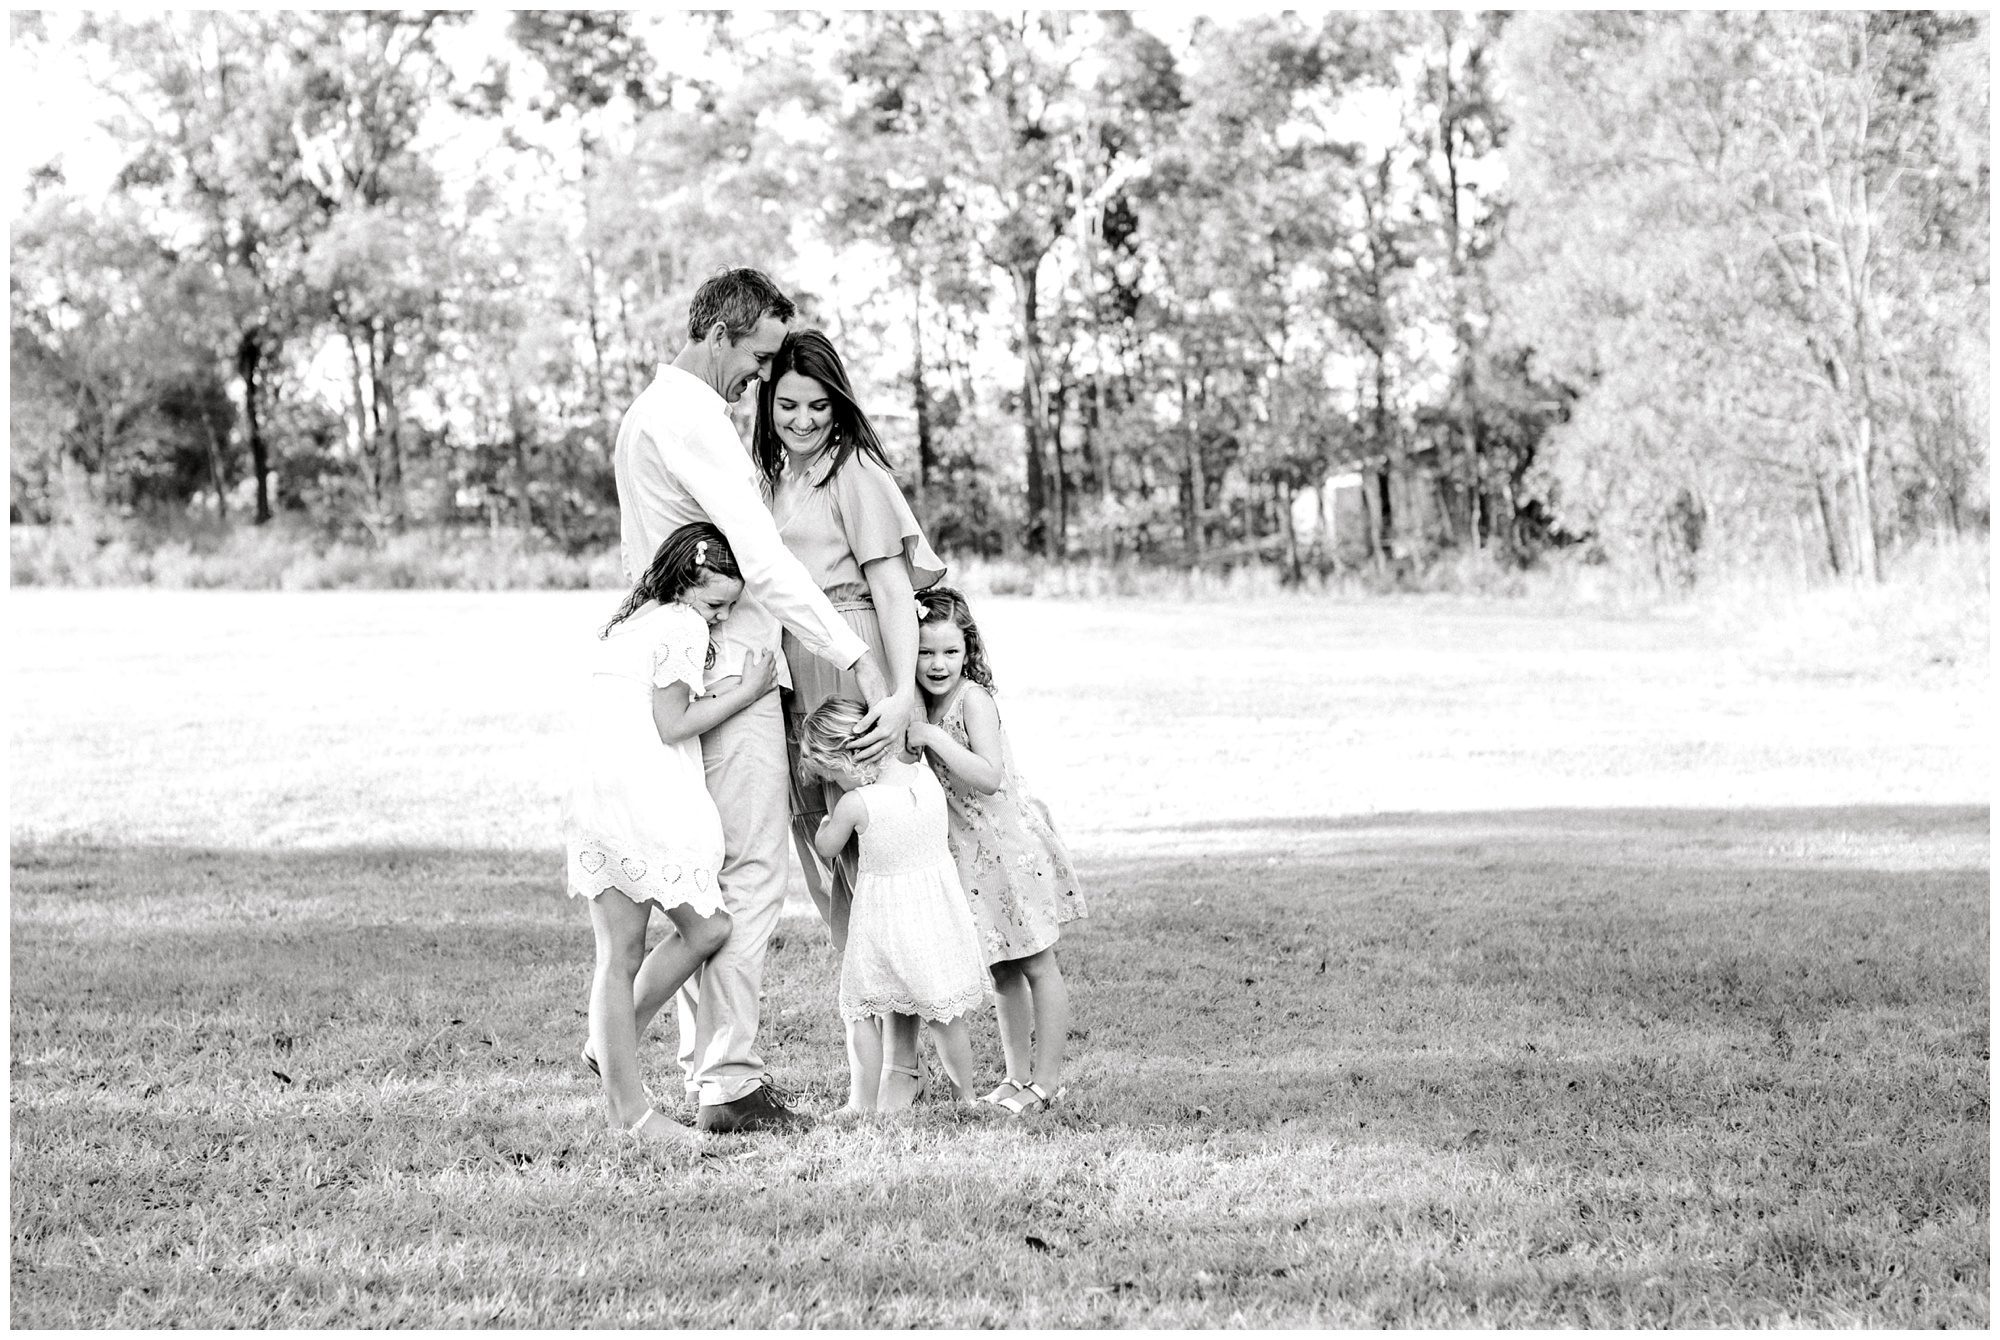 B & W outdoor candid family portraits Brisbane Photography